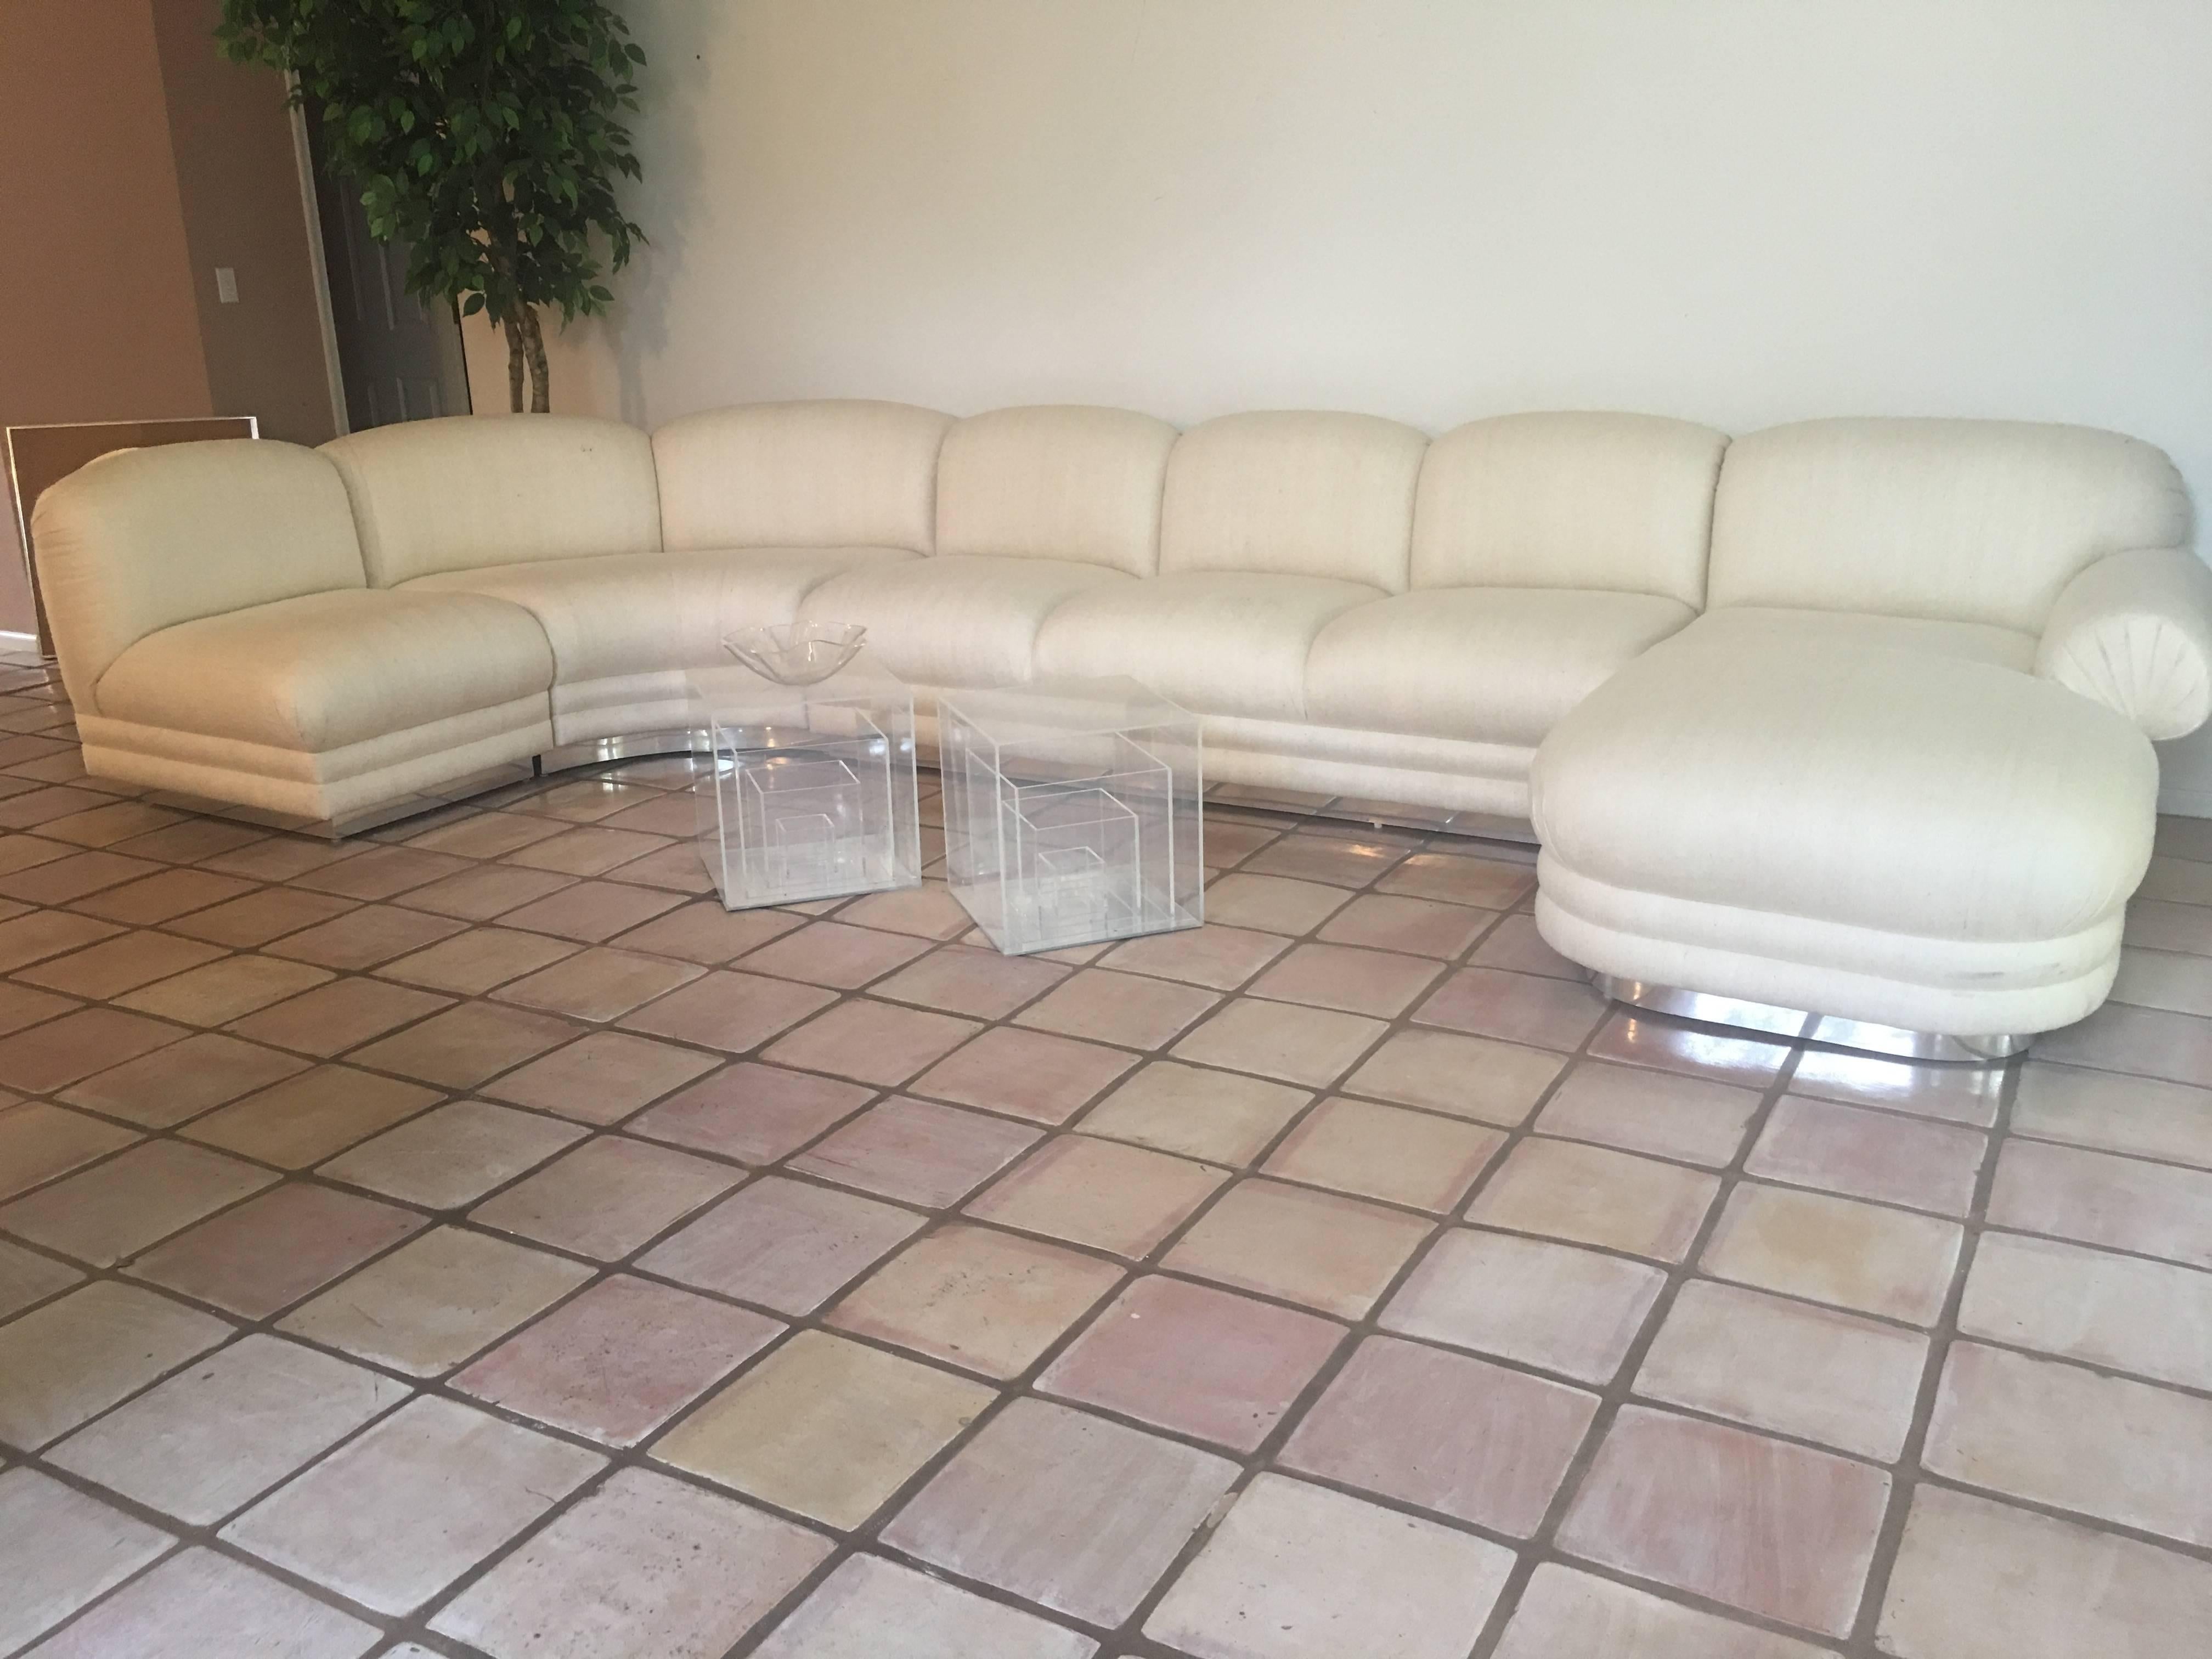 Vintage four four-piece sectional sofa with chaise. Chrome base. This can be rearranged in different styles. Original vintage fabric that has some stains and discoloration, new upholstery recommended. 
Chaise is 70 deep.